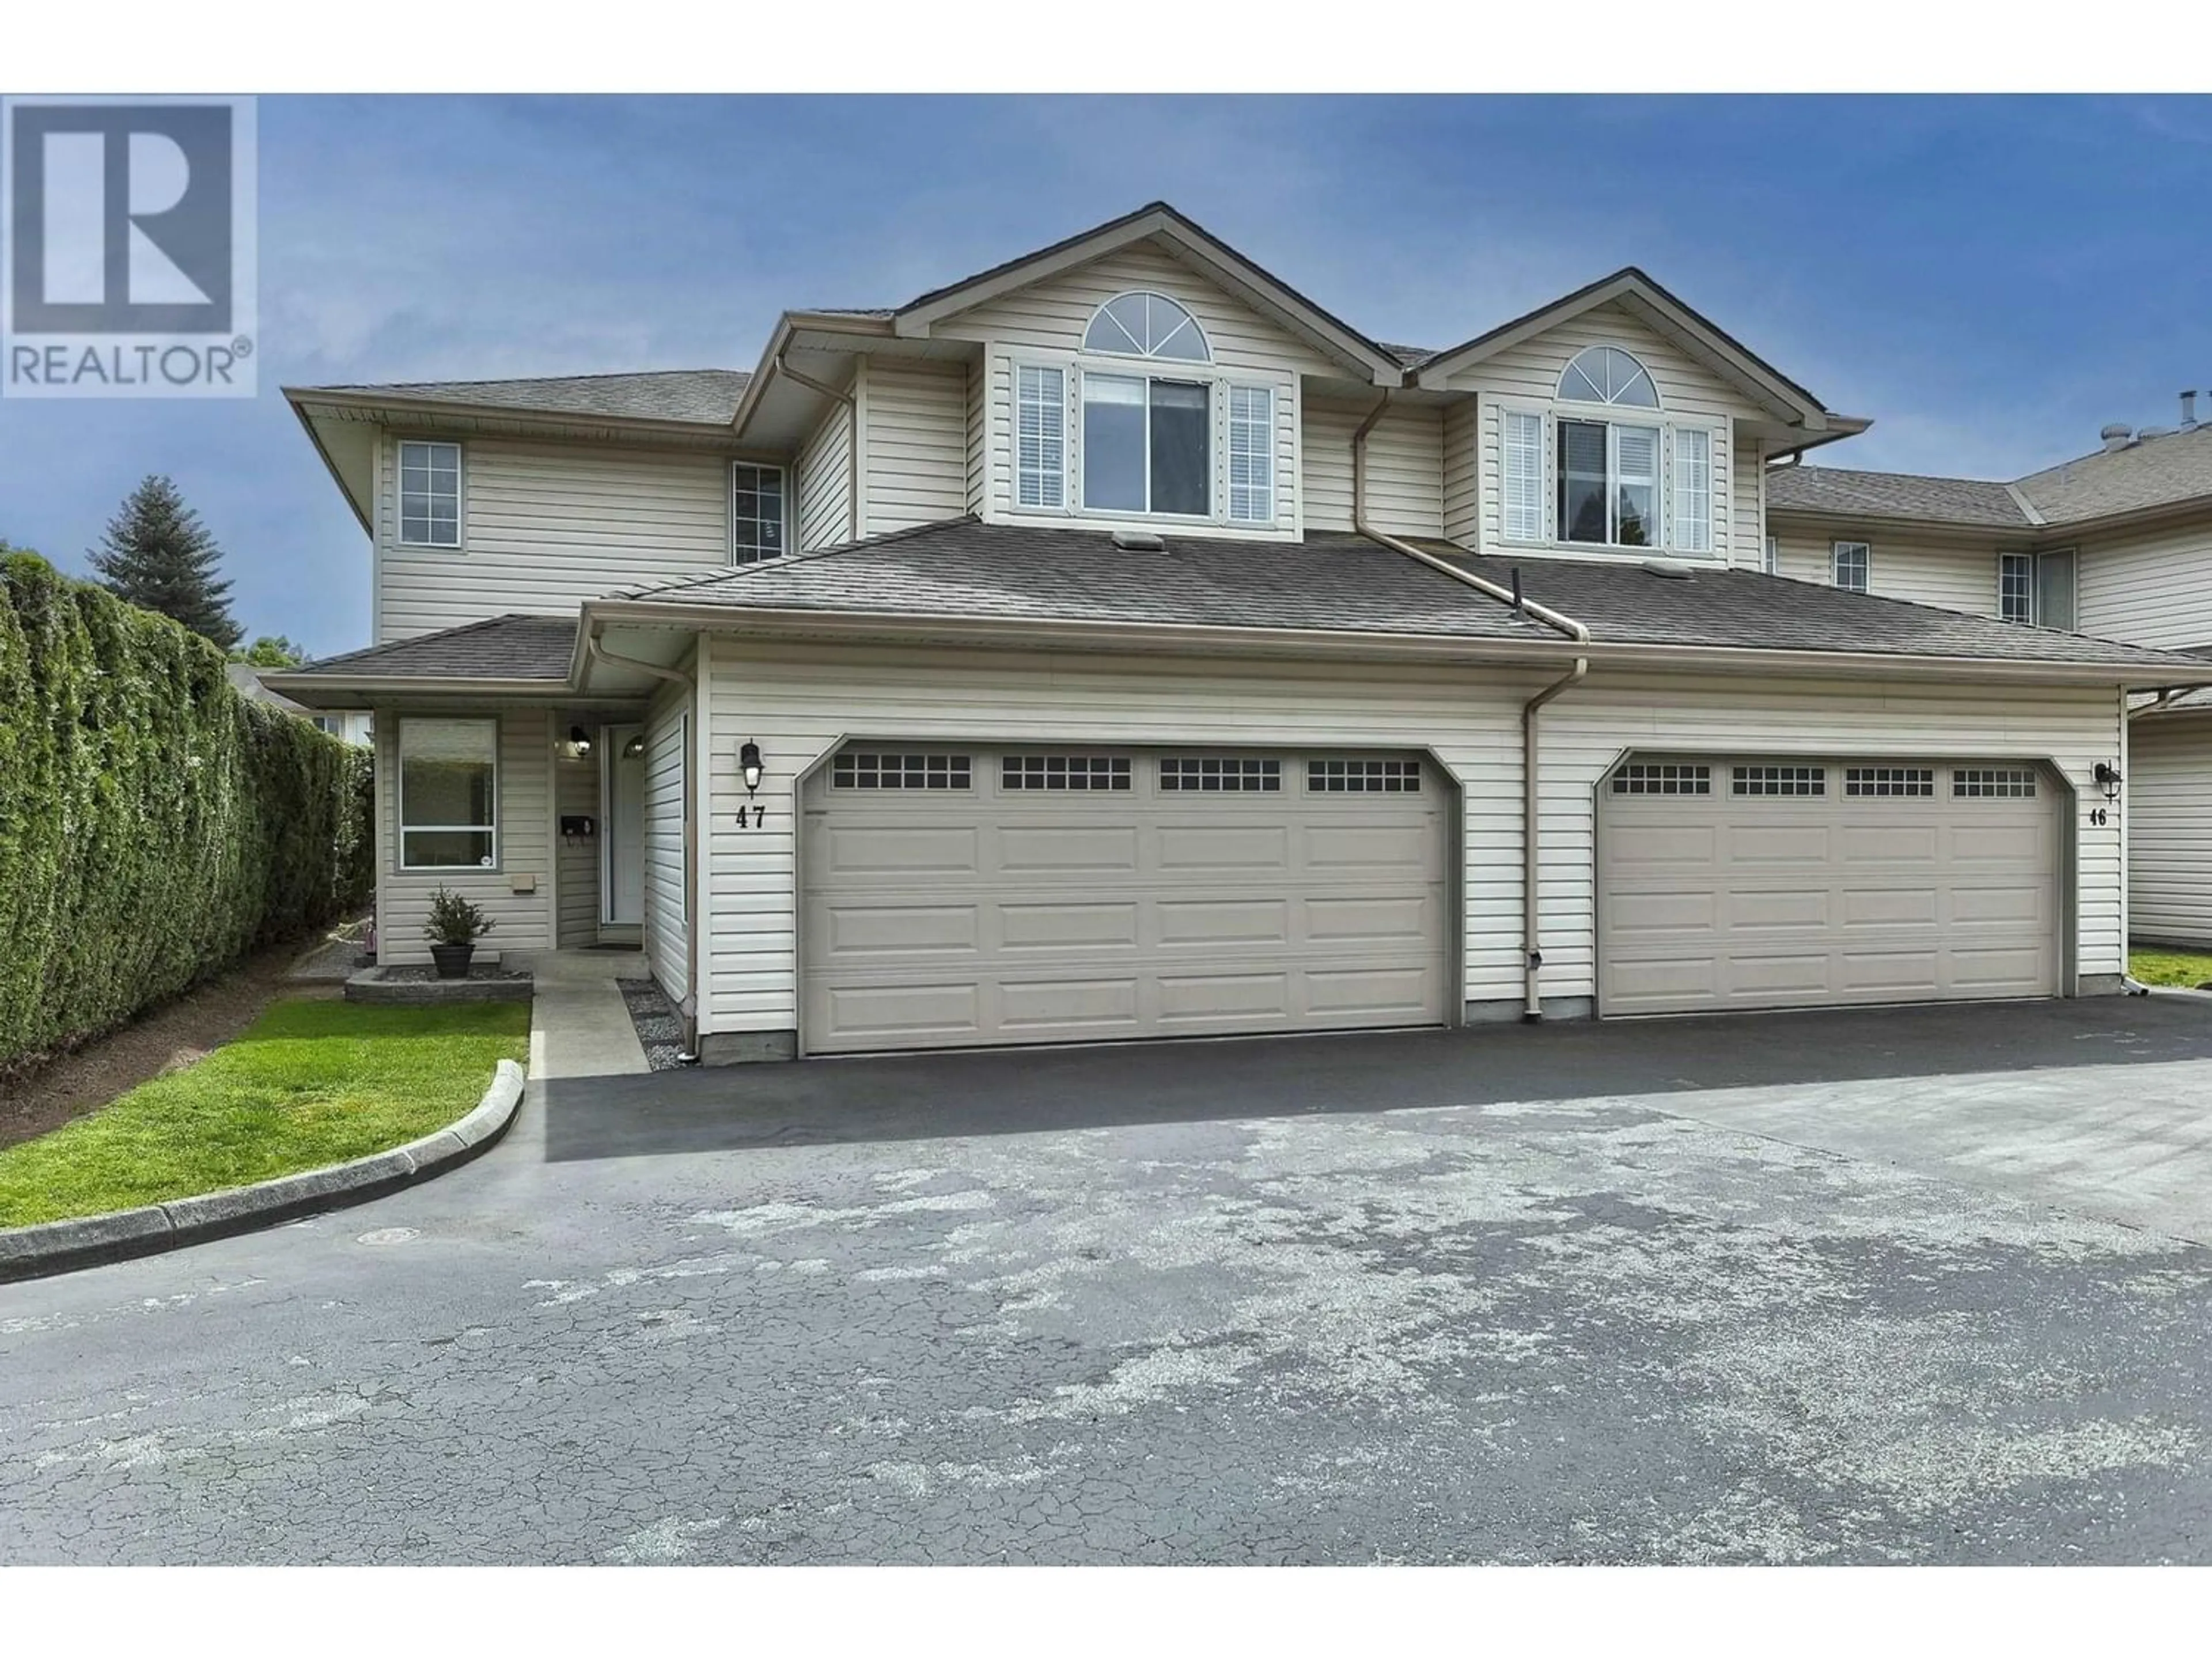 A pic from exterior of the house or condo for 47 12268 189A STREET, Pitt Meadows British Columbia V3Y2M7